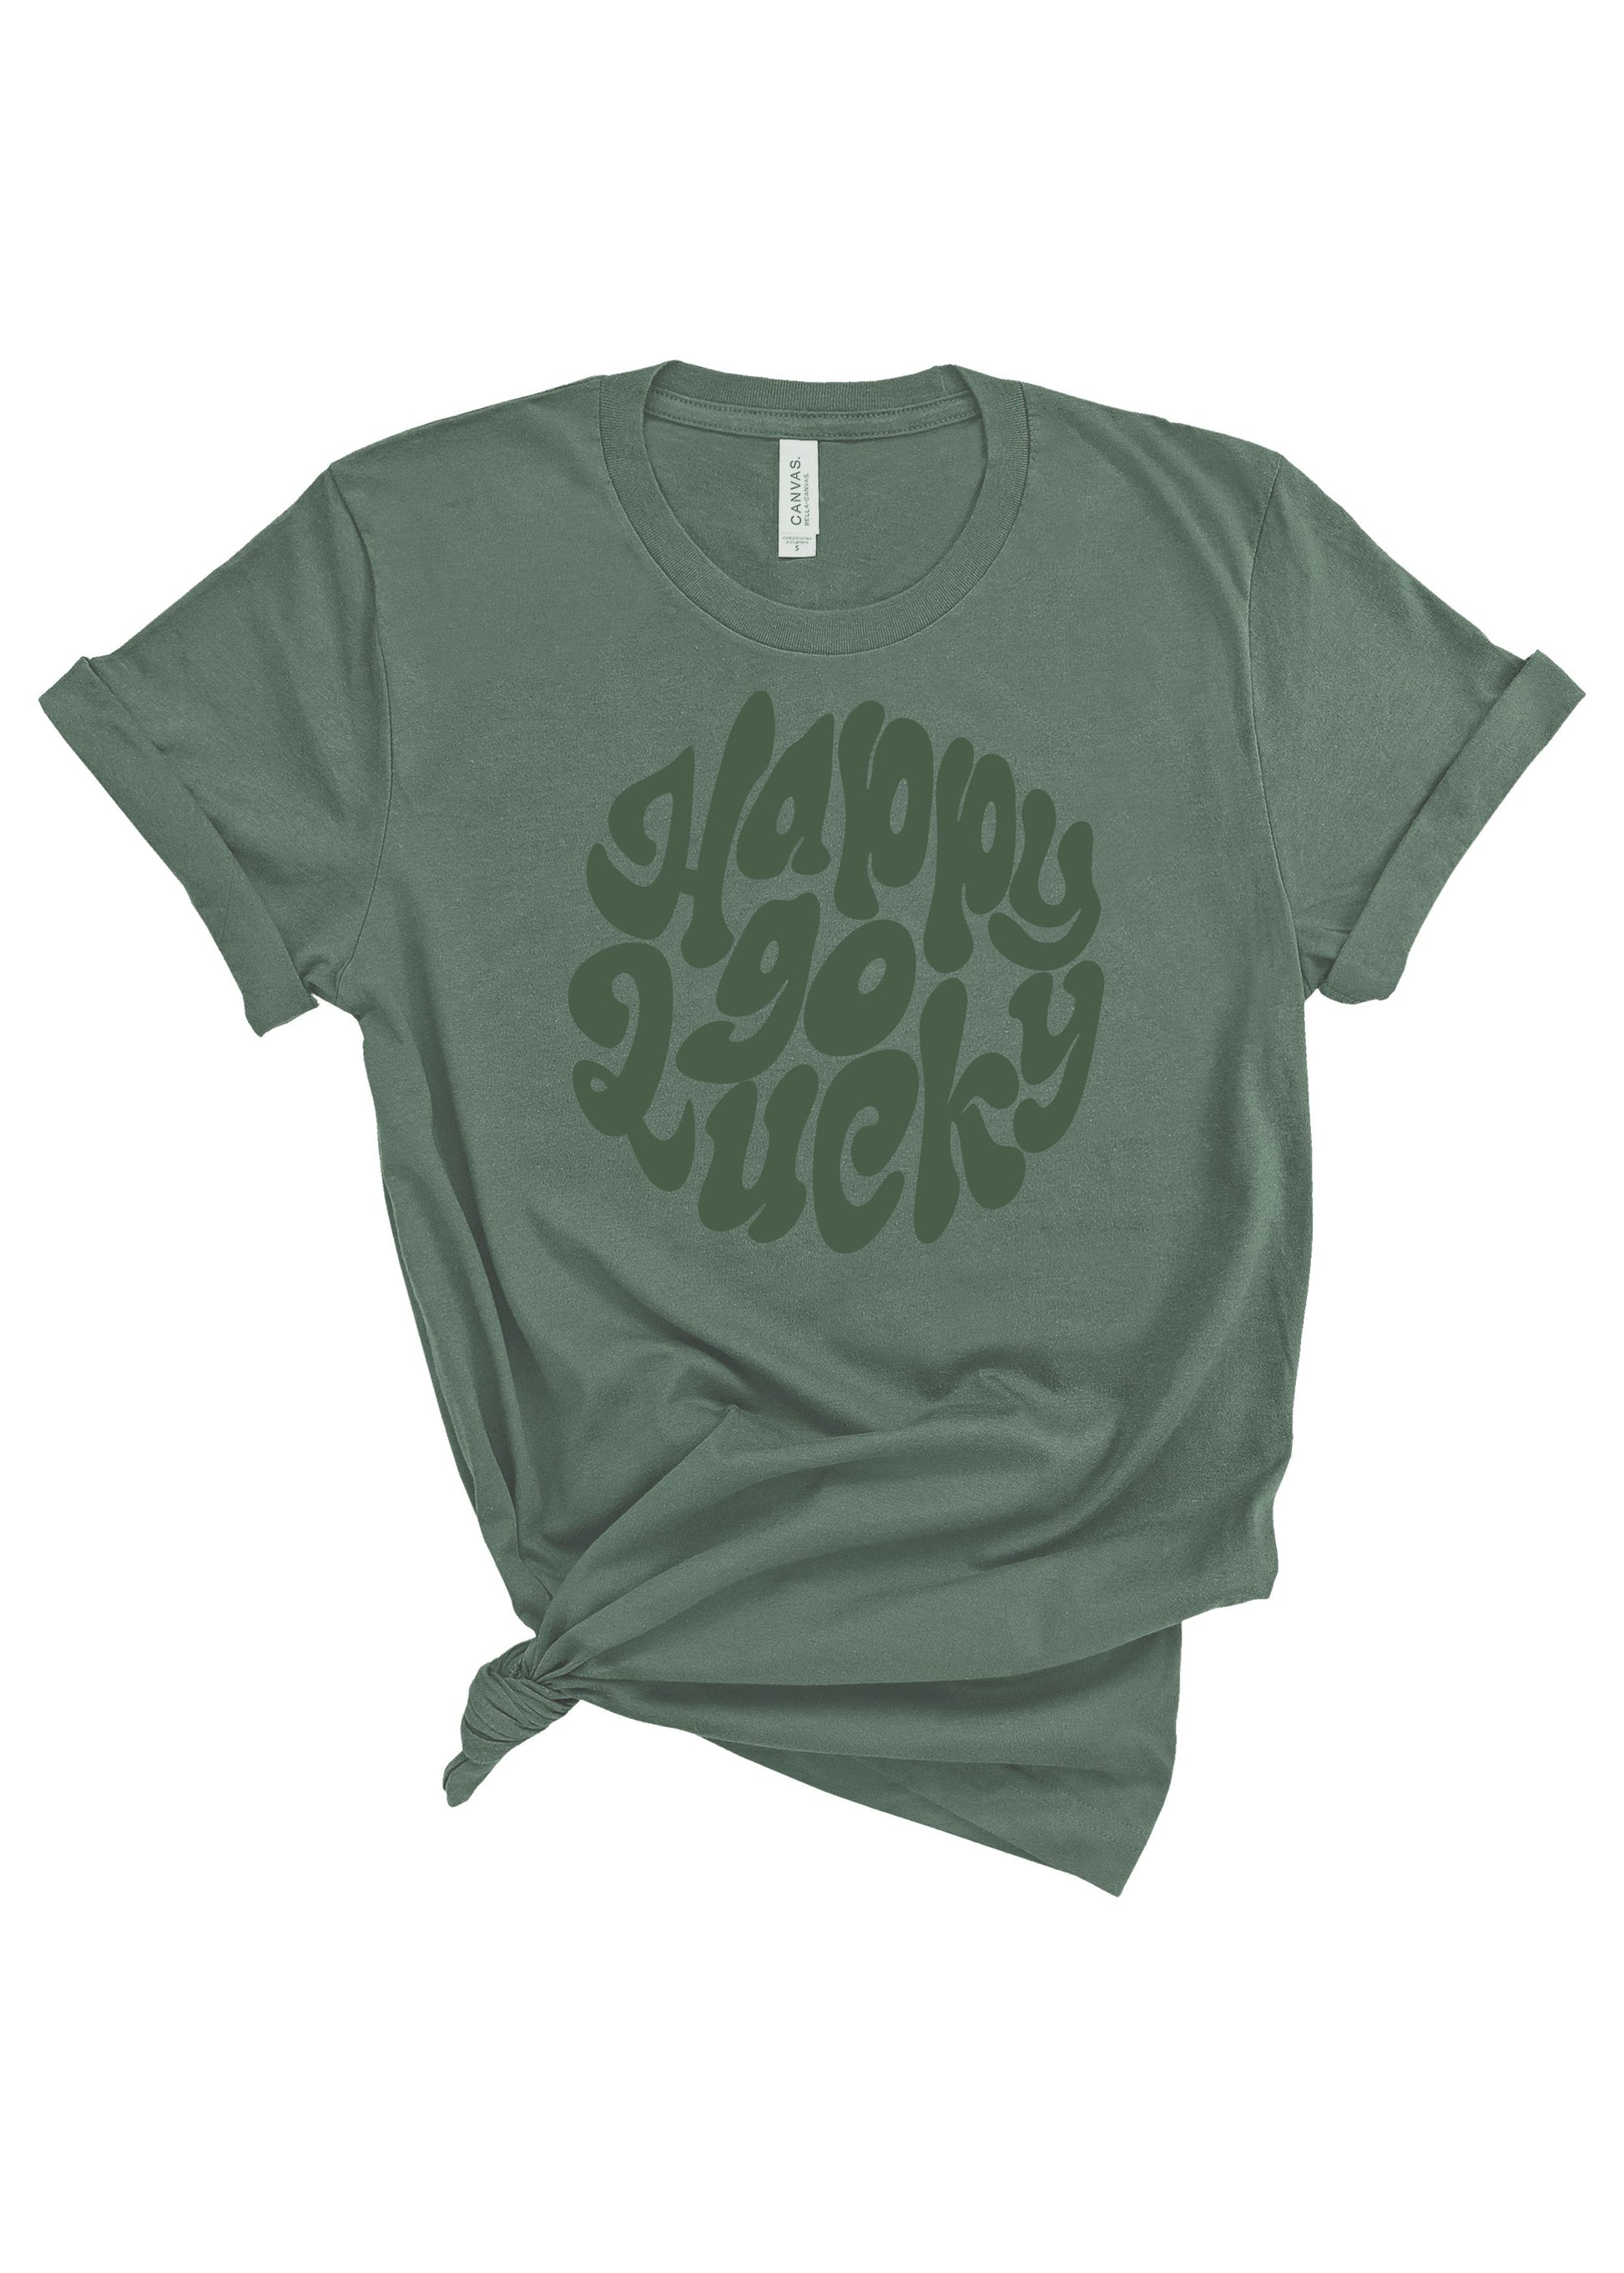 Happy Go Lucky | Tee | Adult-Sister Shirts-Sister Shirts, Cute & Custom Tees for Mama & Littles in Trussville, Alabama.